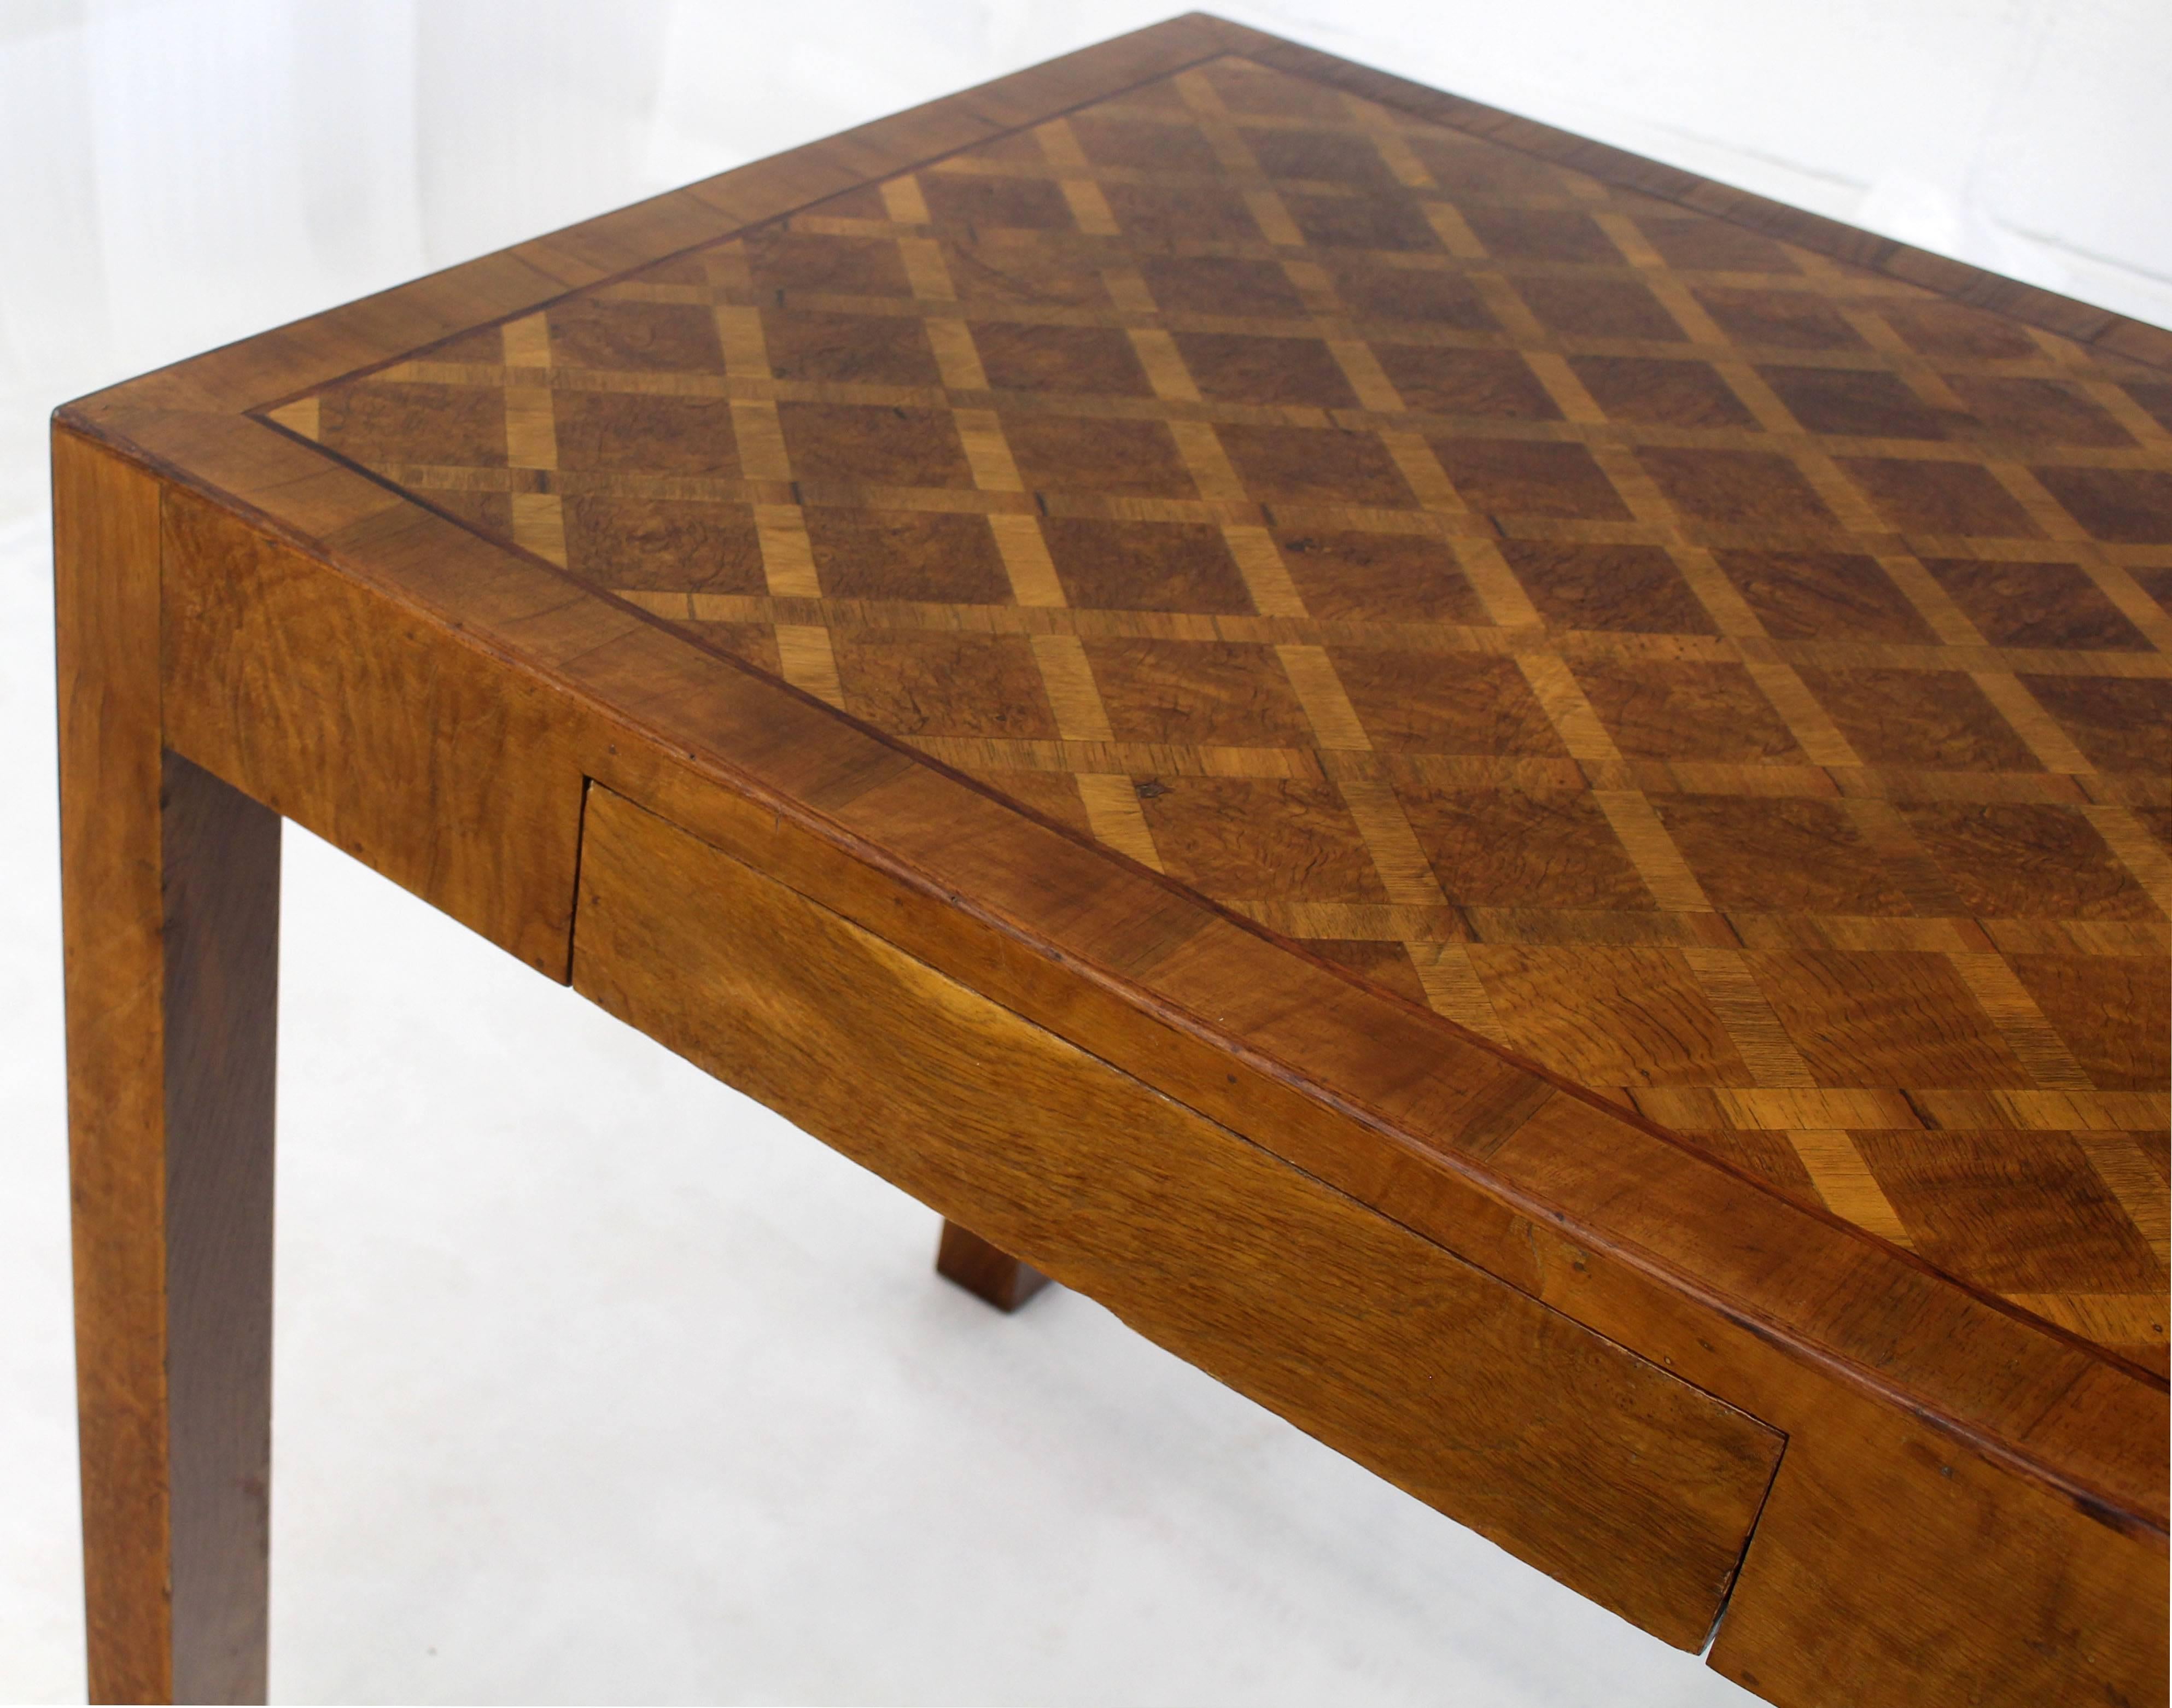 20th Century Italian Parquet Marquetry Burl Walnut Top Parsons Desk Writing Table Two Drawers